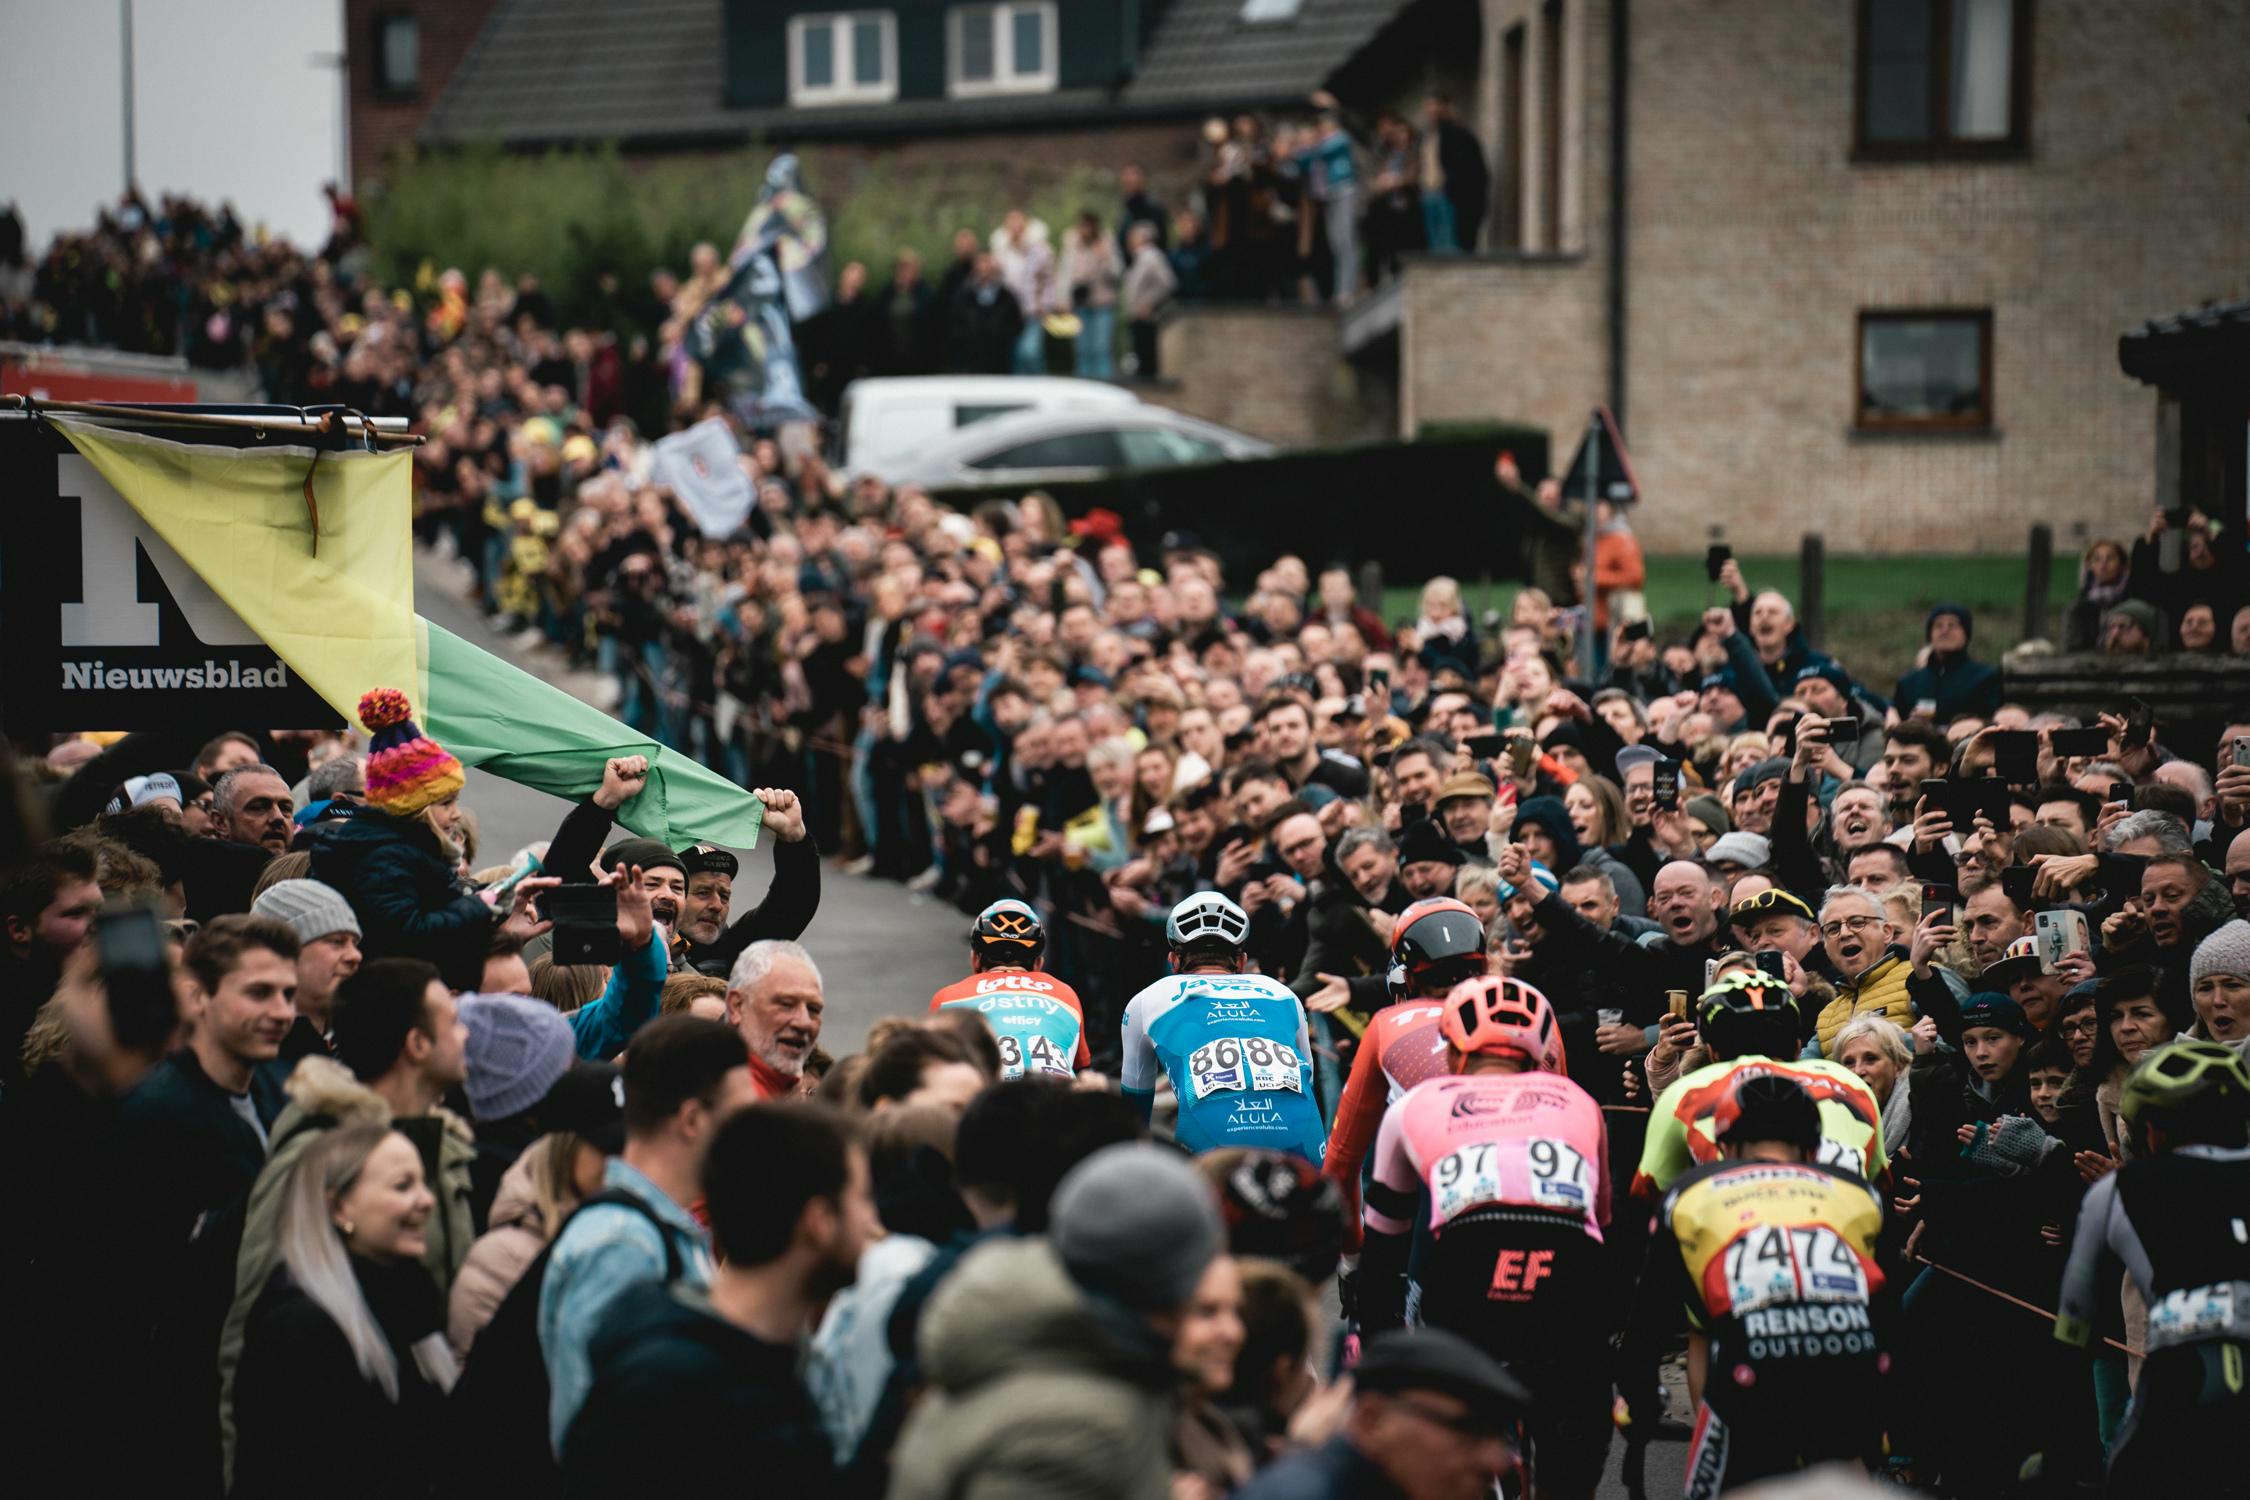 TUDOR is the official timekeeper of the Flanders Classics spring classics